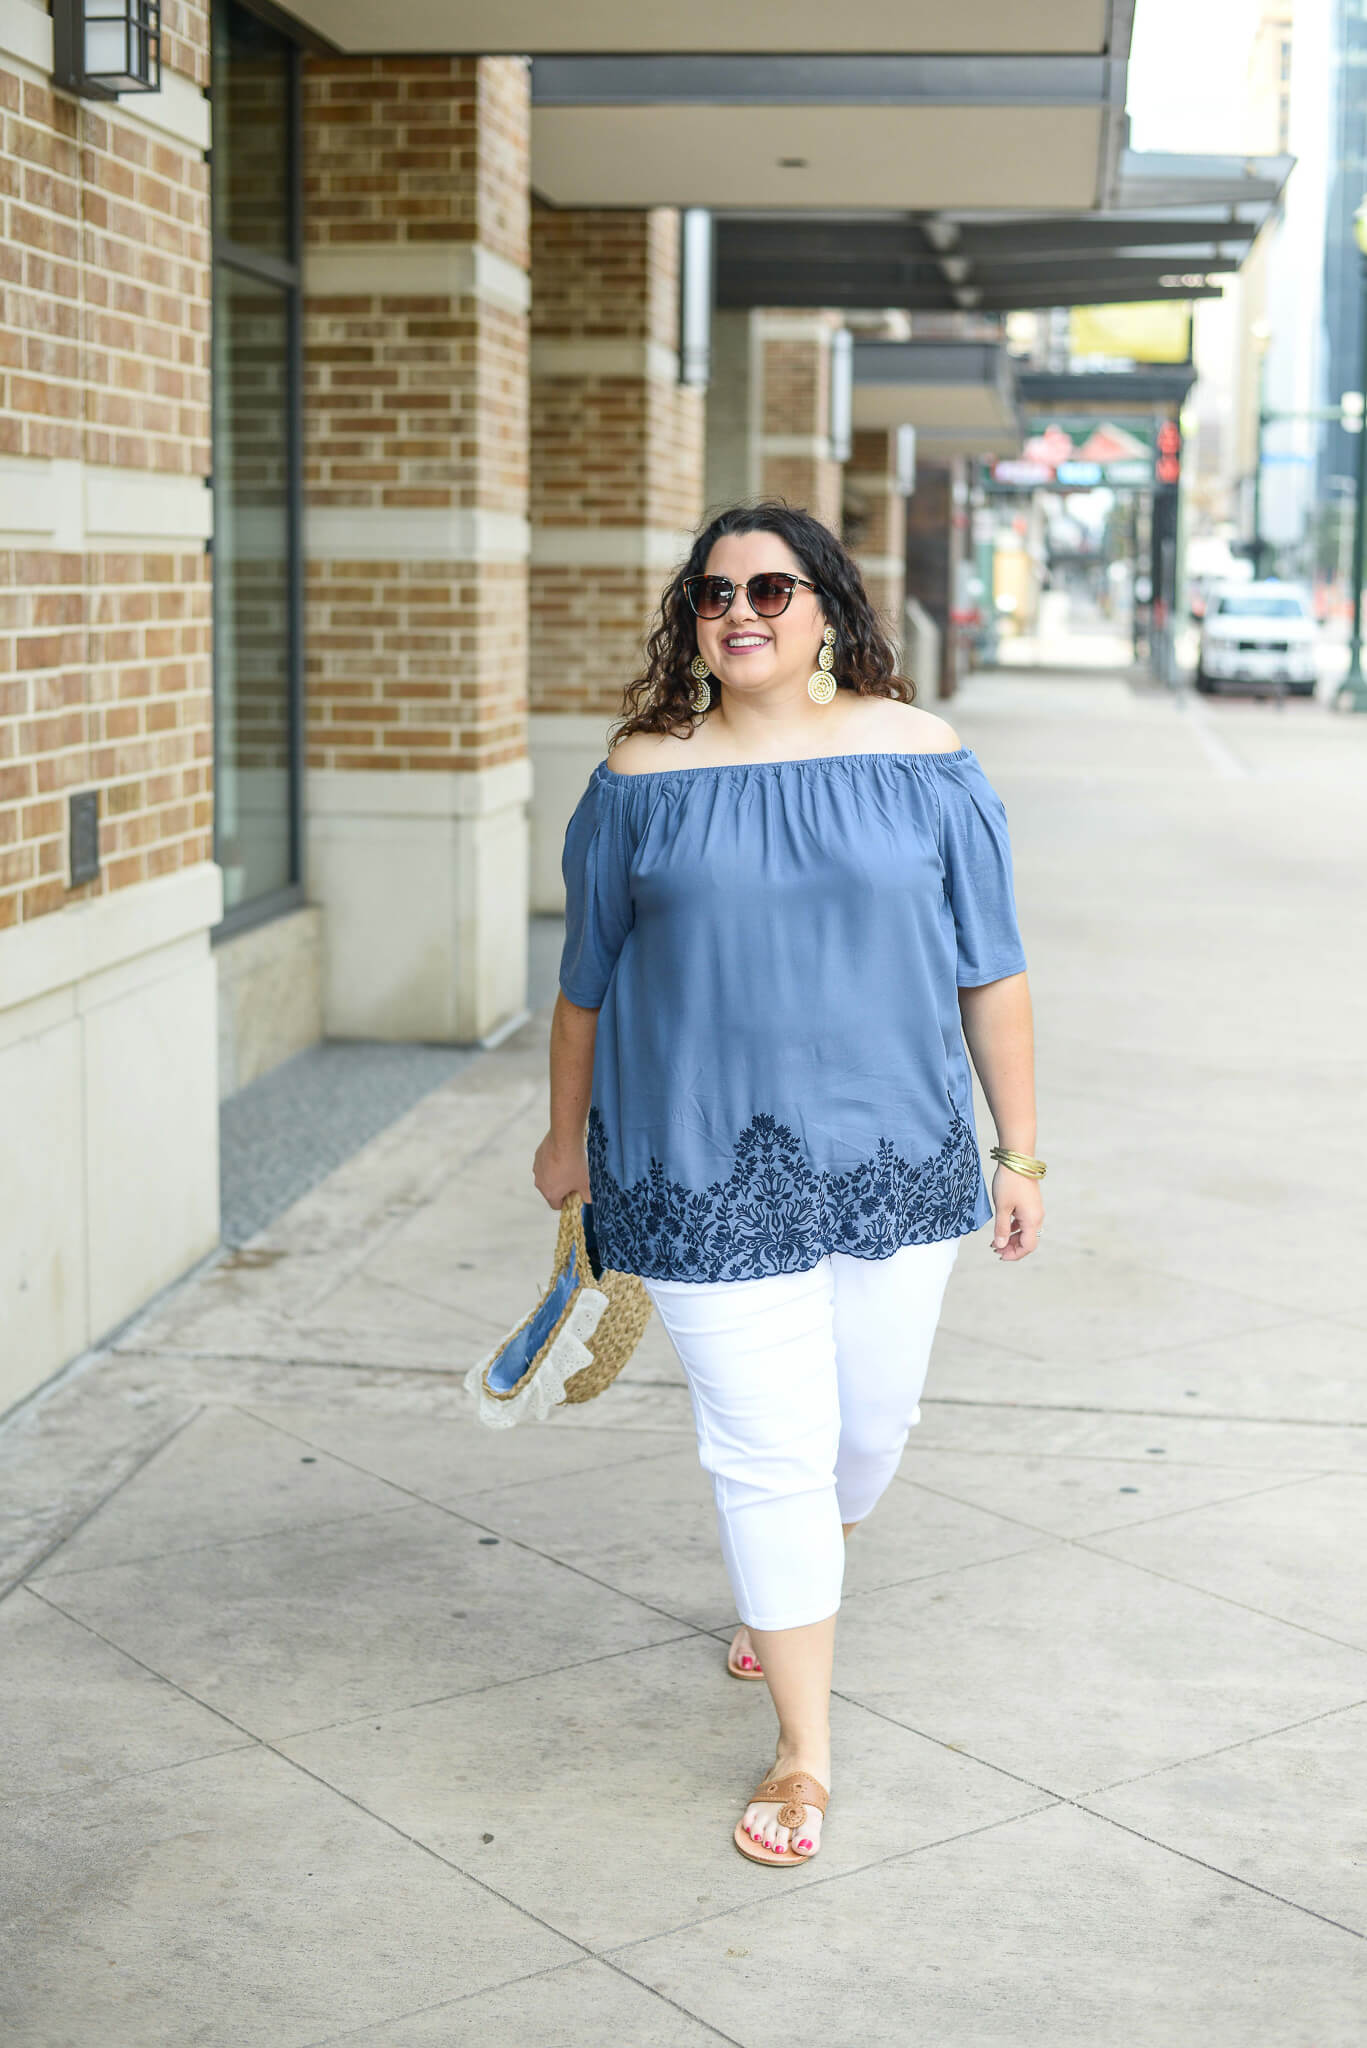 Plus size all around brand, Just My Size, is celebrating their 35th birthday this year! 